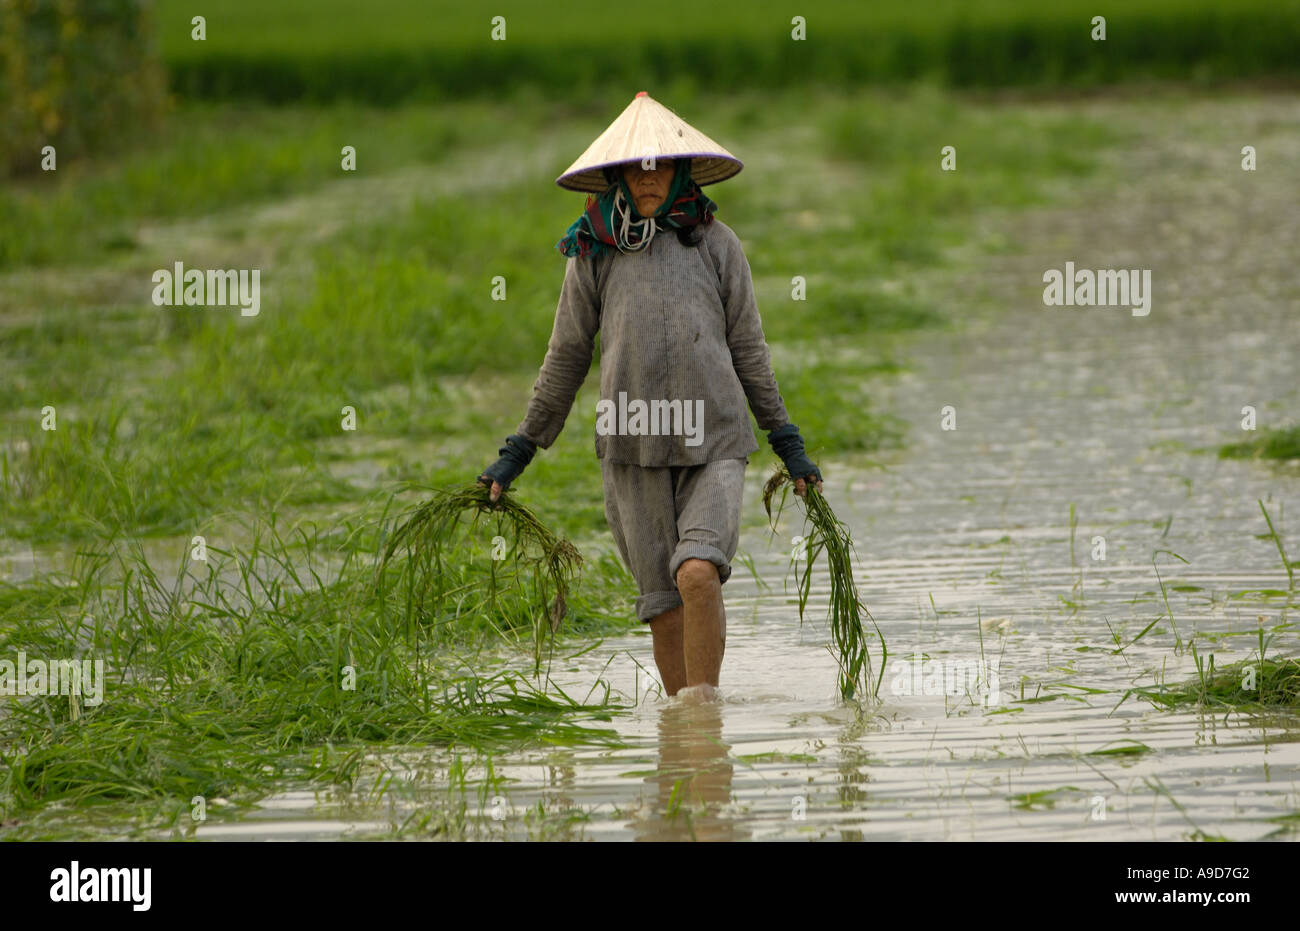 A woman transplants rice seedlings in a village of Sanya Hainan China March 29 2006 Stock Photo